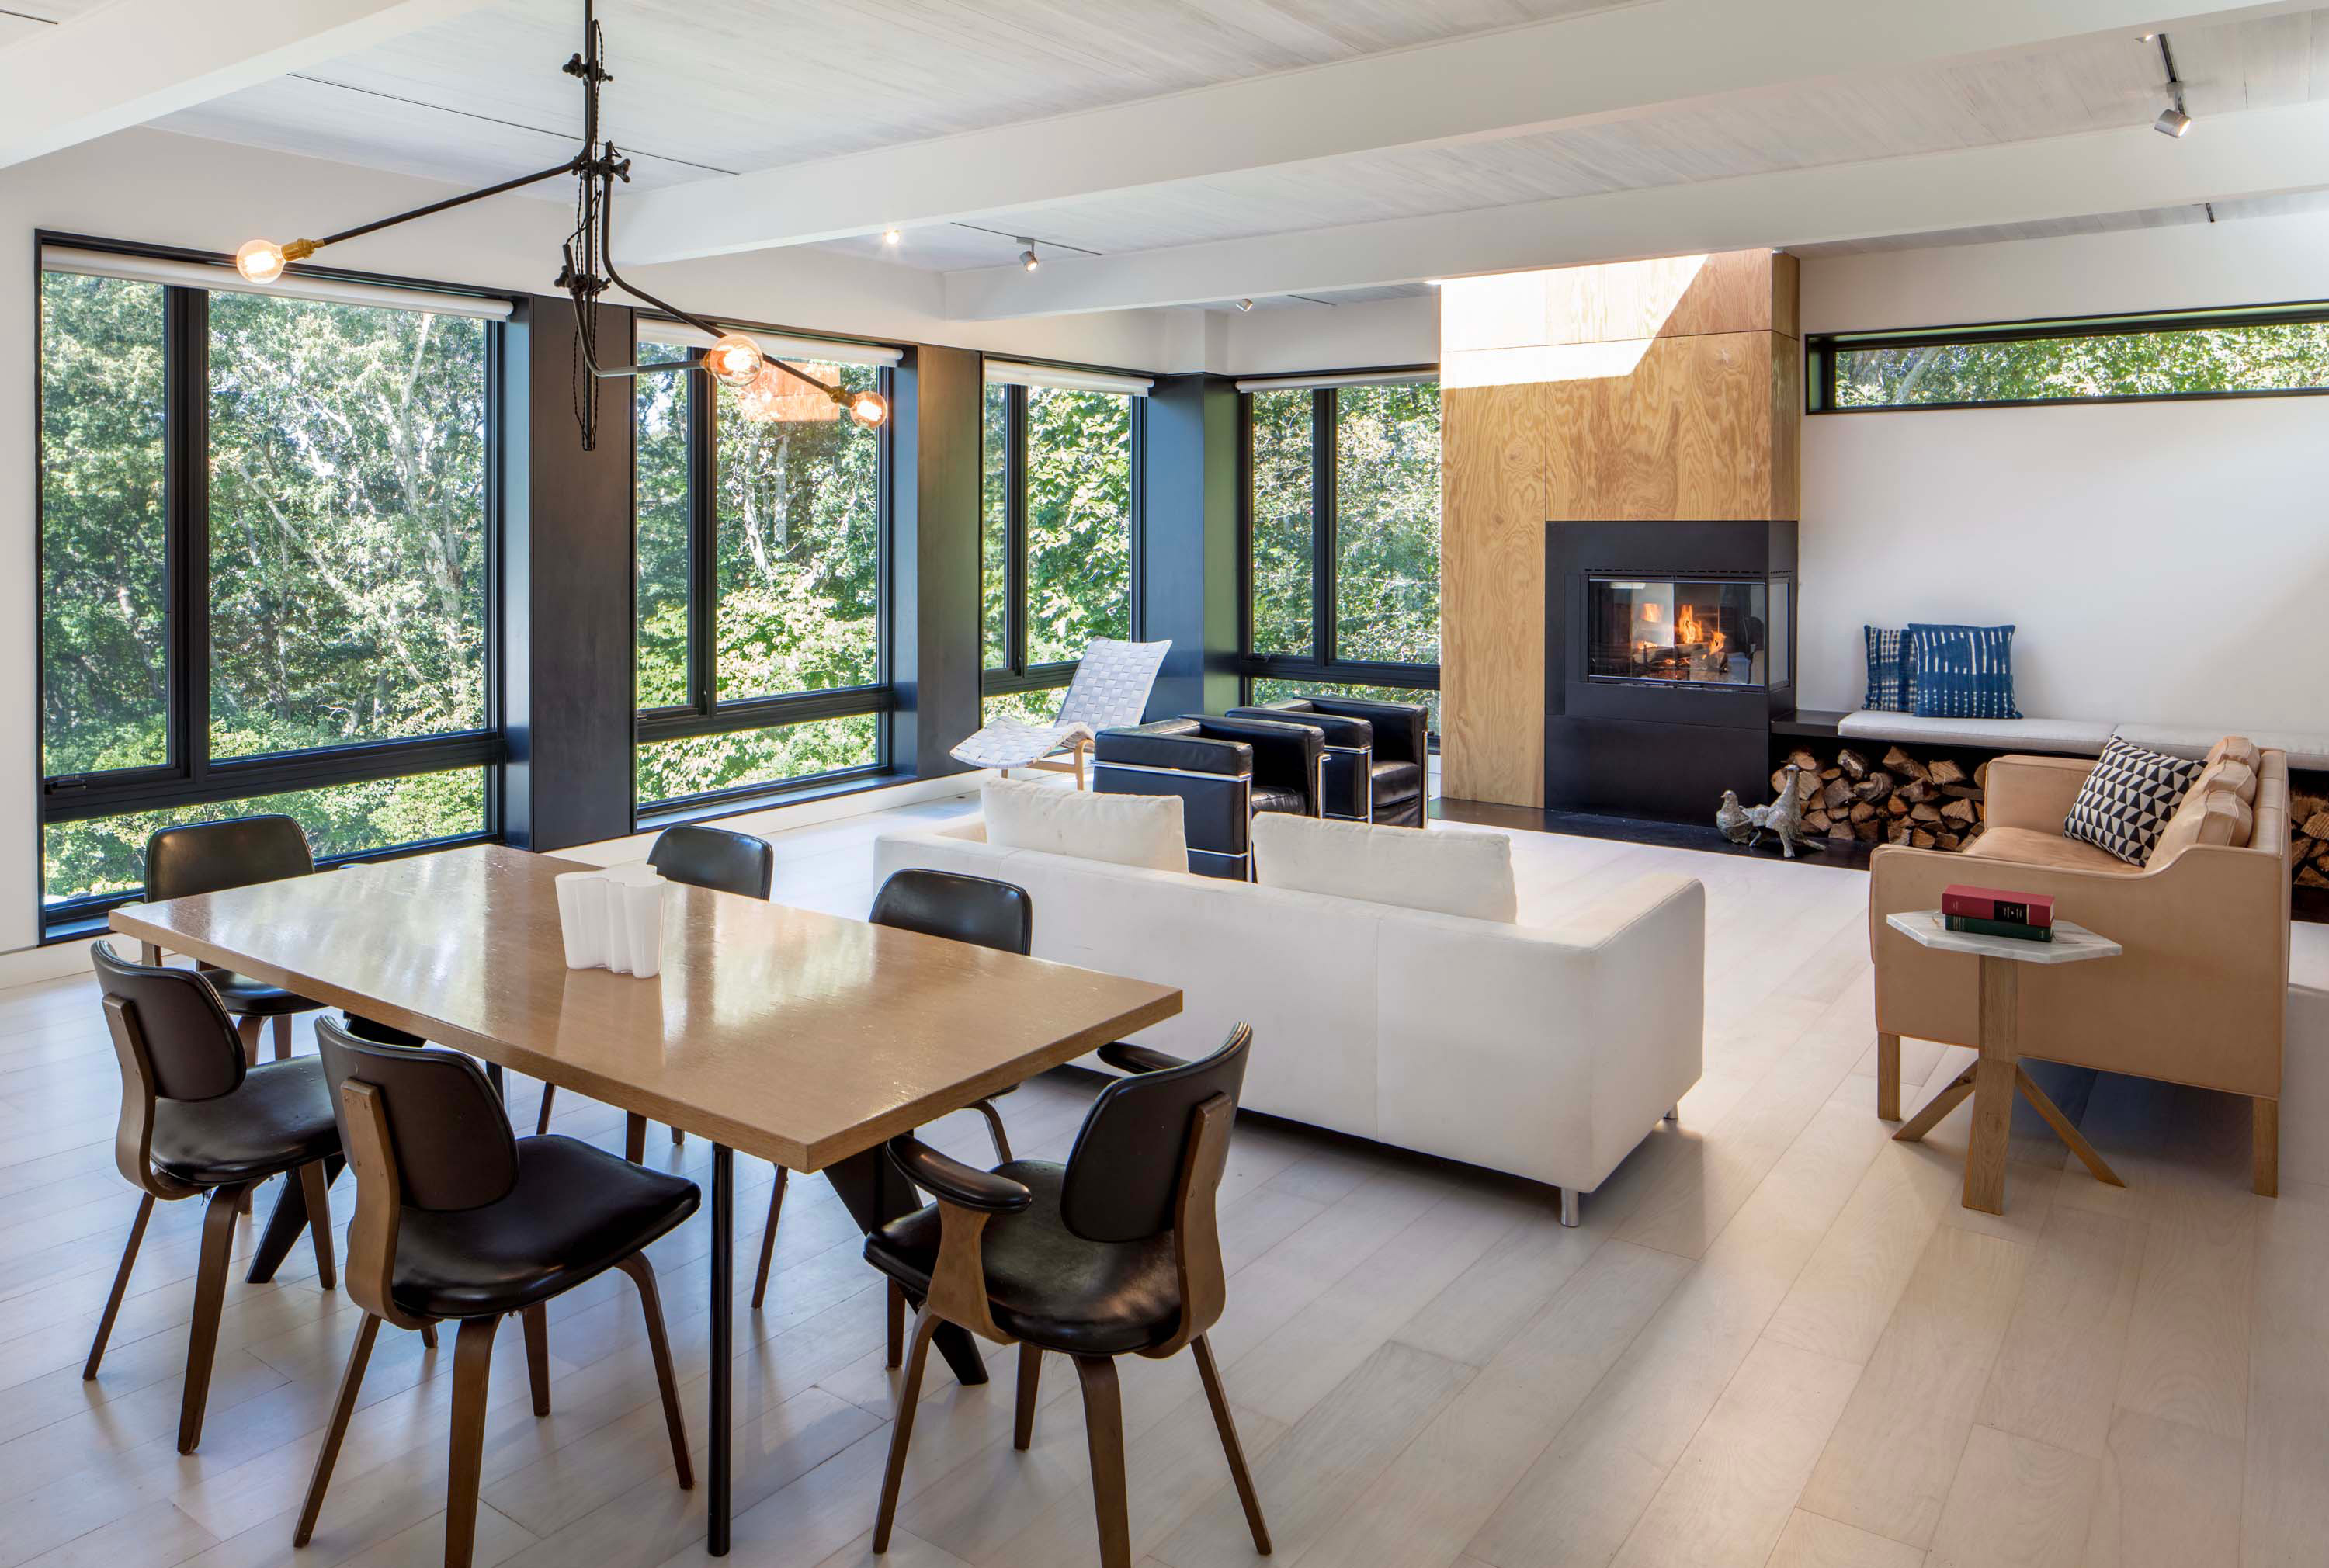 Living room of Bridgehampton House by Specht Novak Architects, featuring wood clad hearth and floor-to-ceiling windows. Shot by Taggart Sorensen.